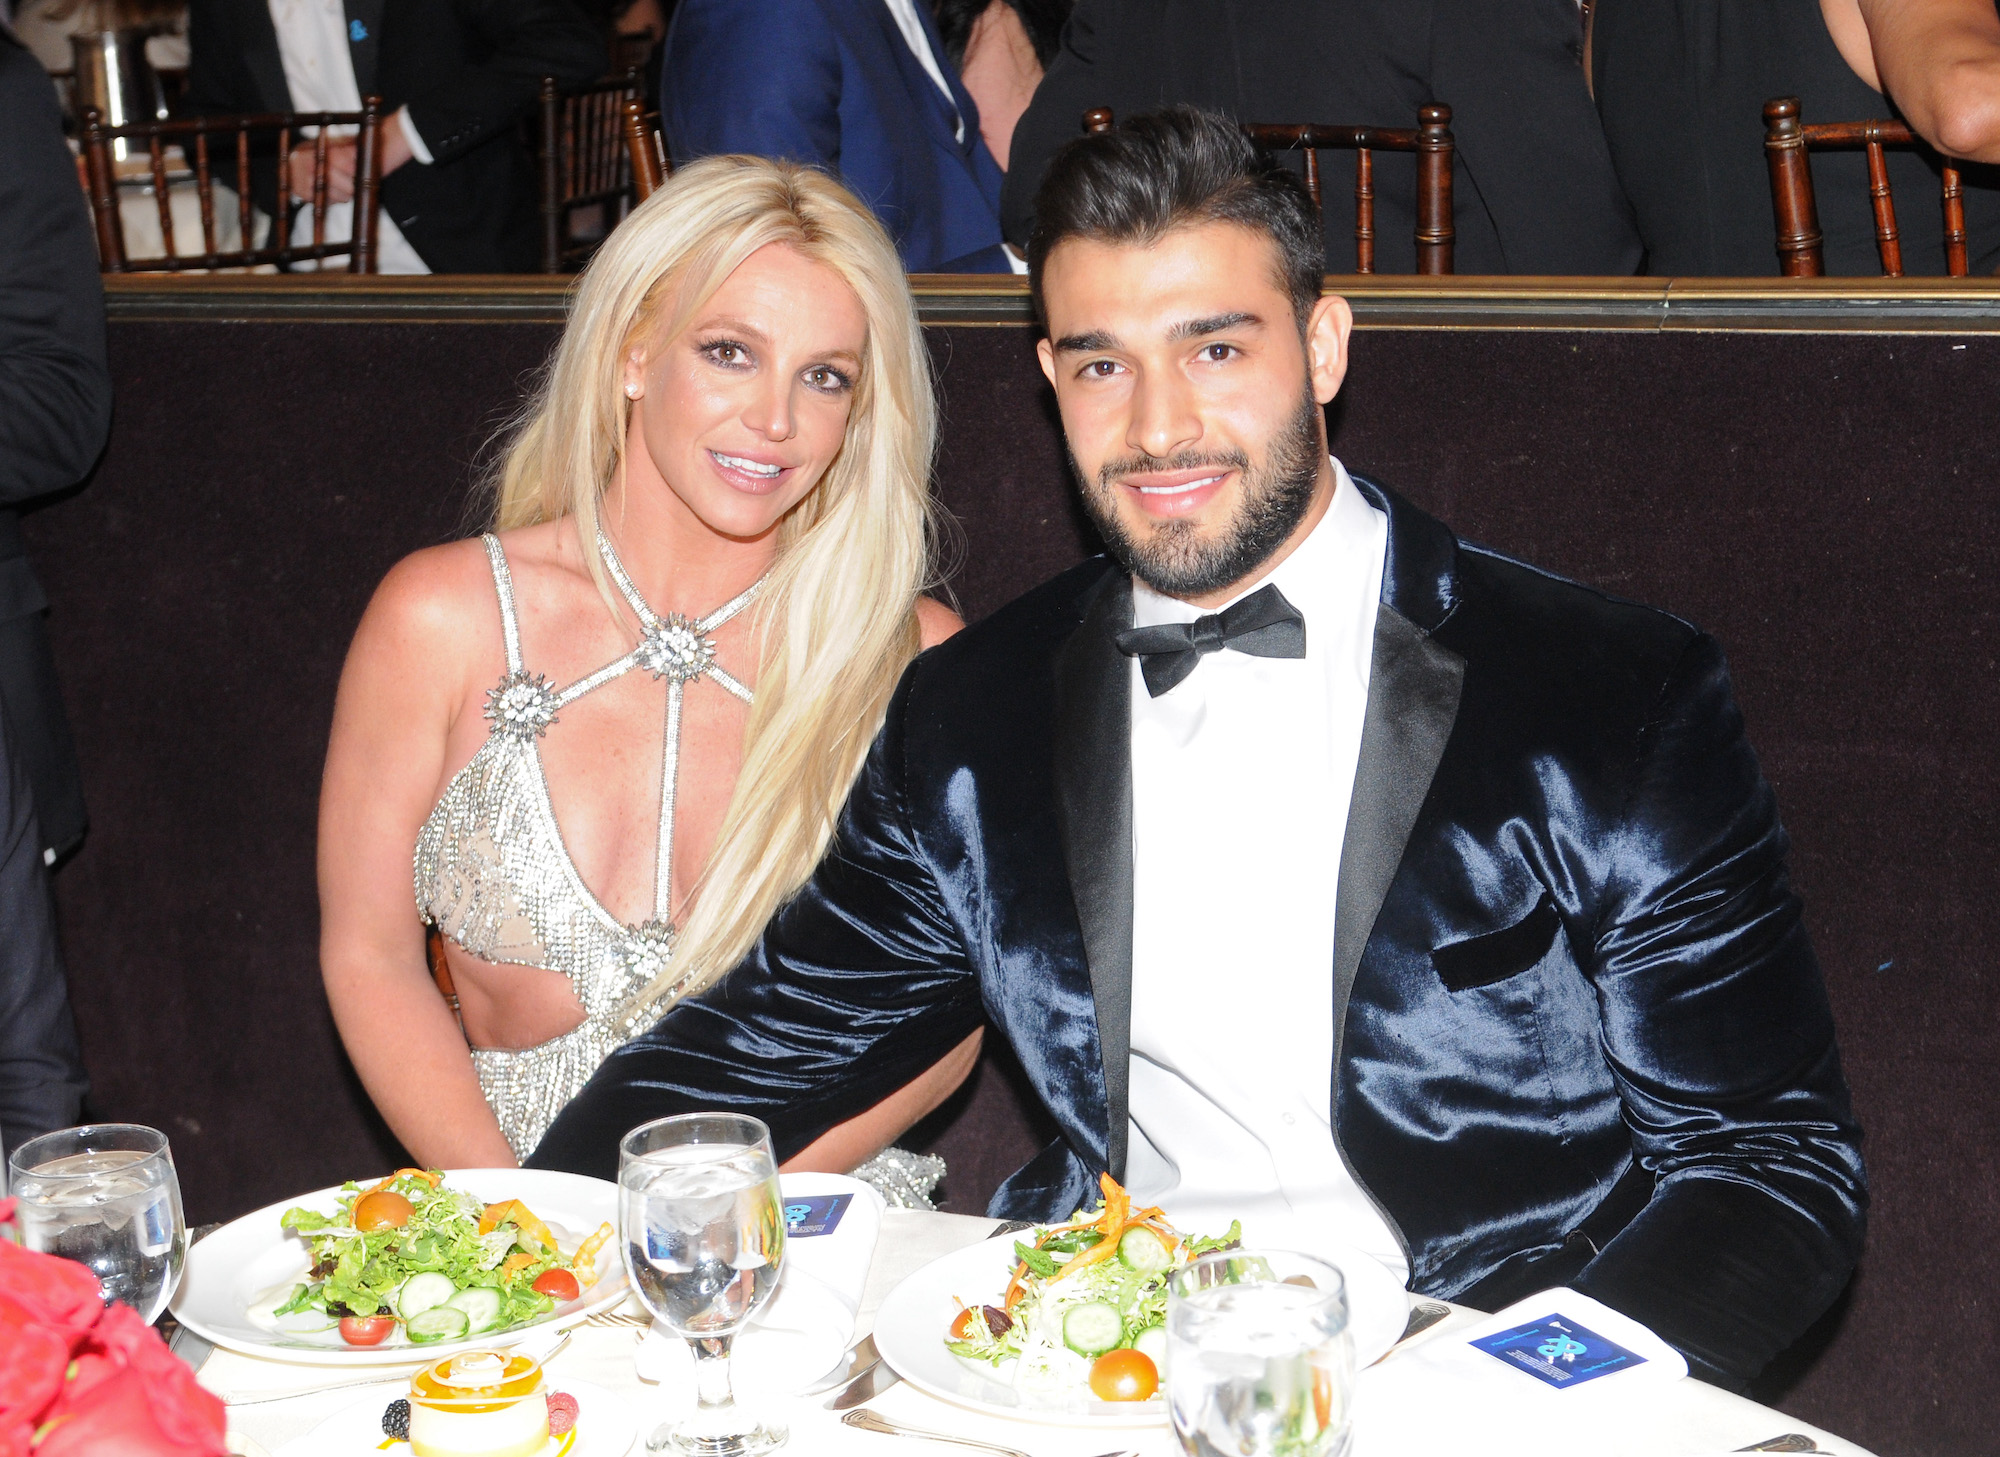 Britney Spears and Sam Asghari attending the 29th Annual GLAAD Media Awards in 2018 